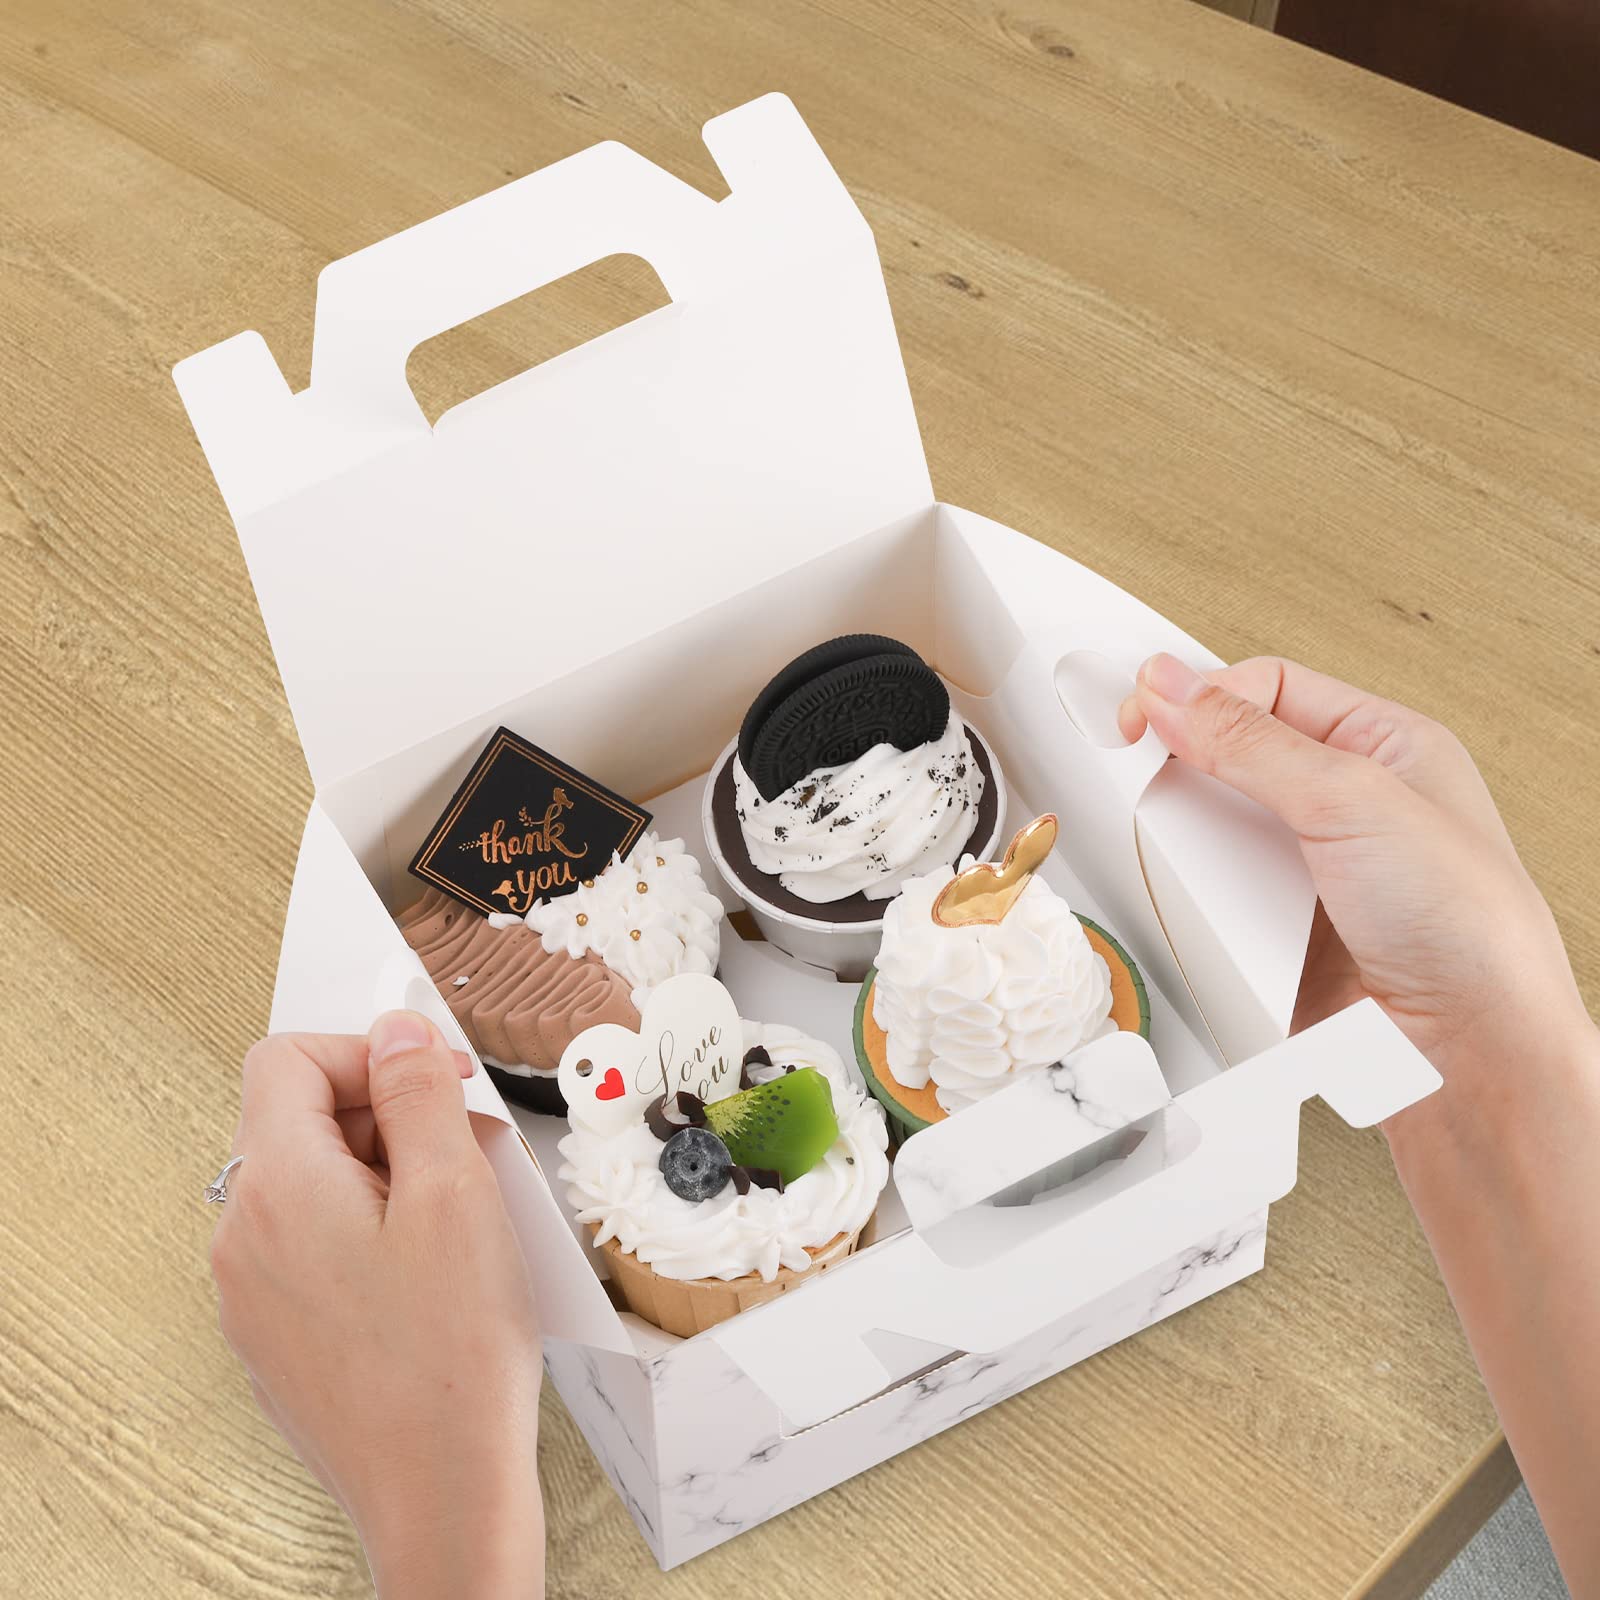 ZEAYEA 40 Pack Cupcake Boxes with Window and Handle, 4 Cavity Paper Cupcake Holder Carrier, Portable Pastry Containers, Muffins Carriers for Bakery Wrapping Party Favor Packing